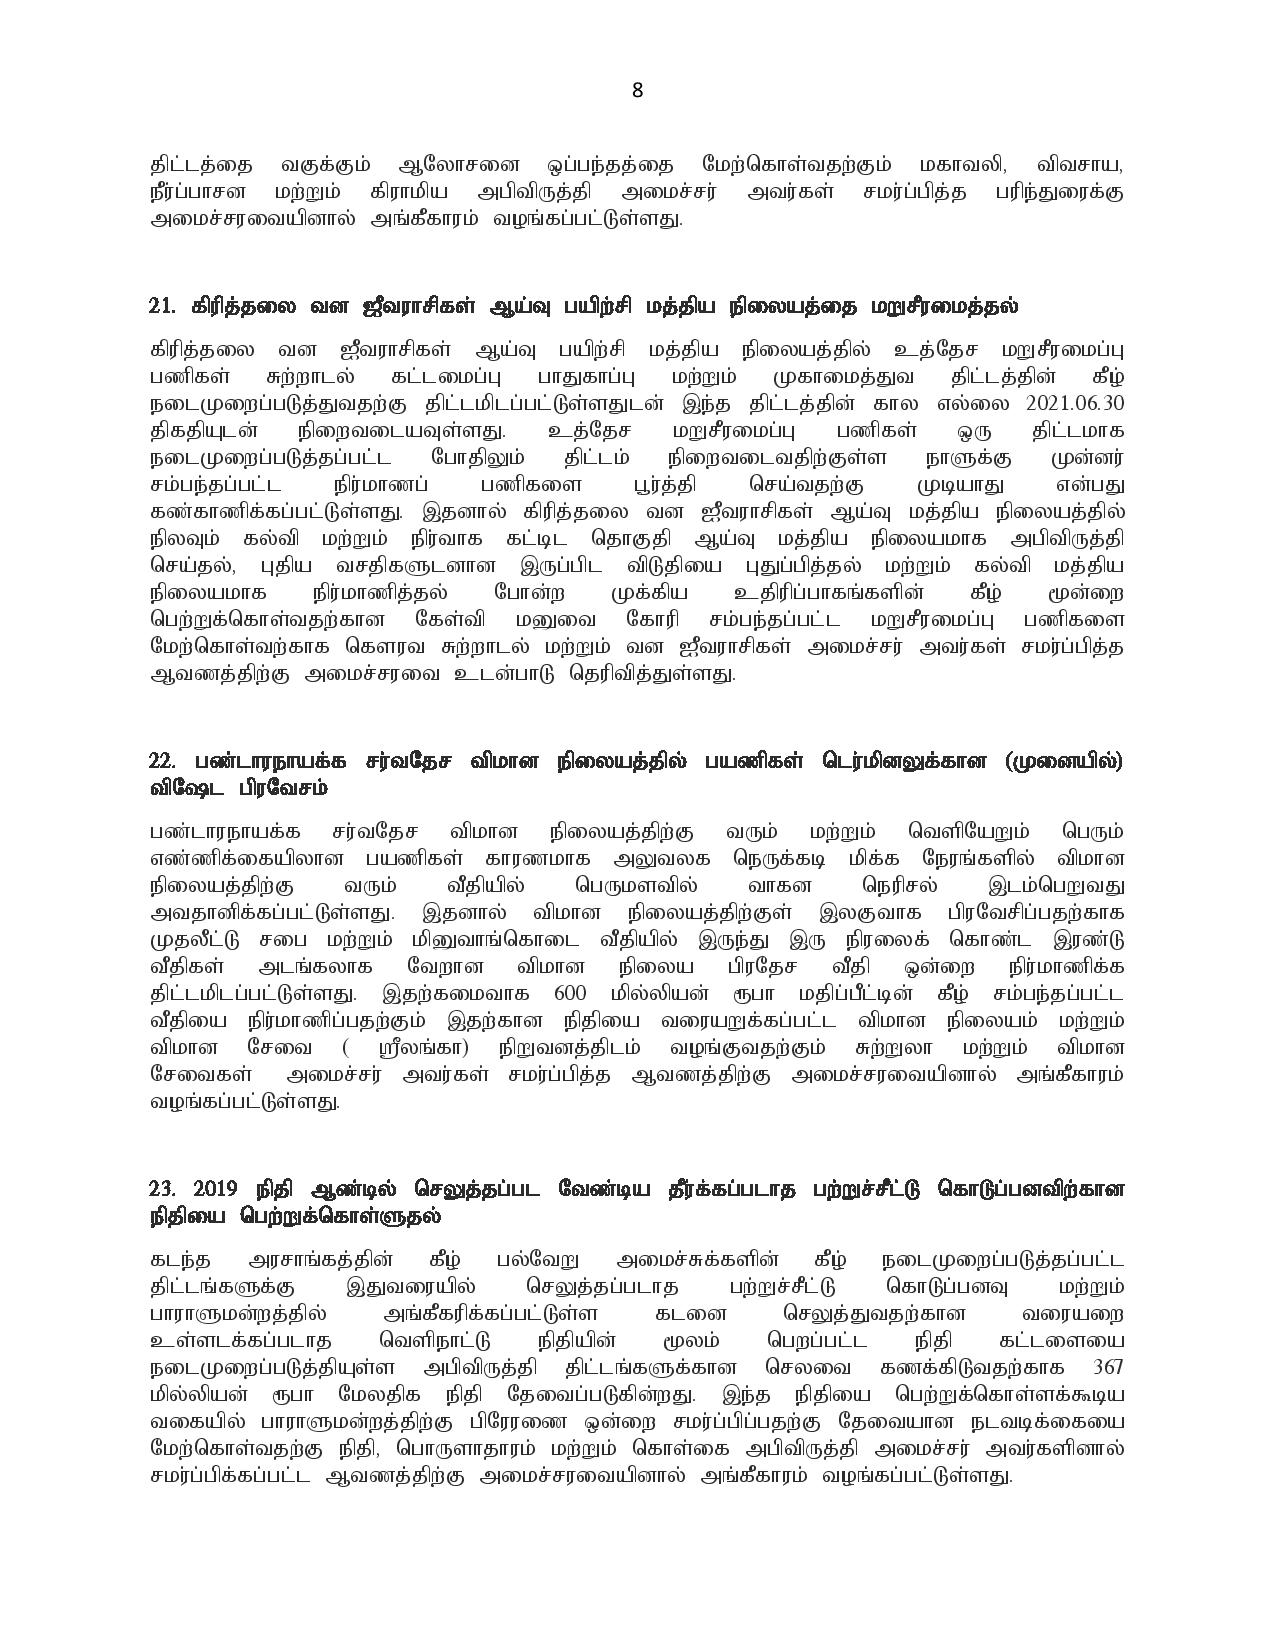 05.02.2020 Cabinet Tamil page 008